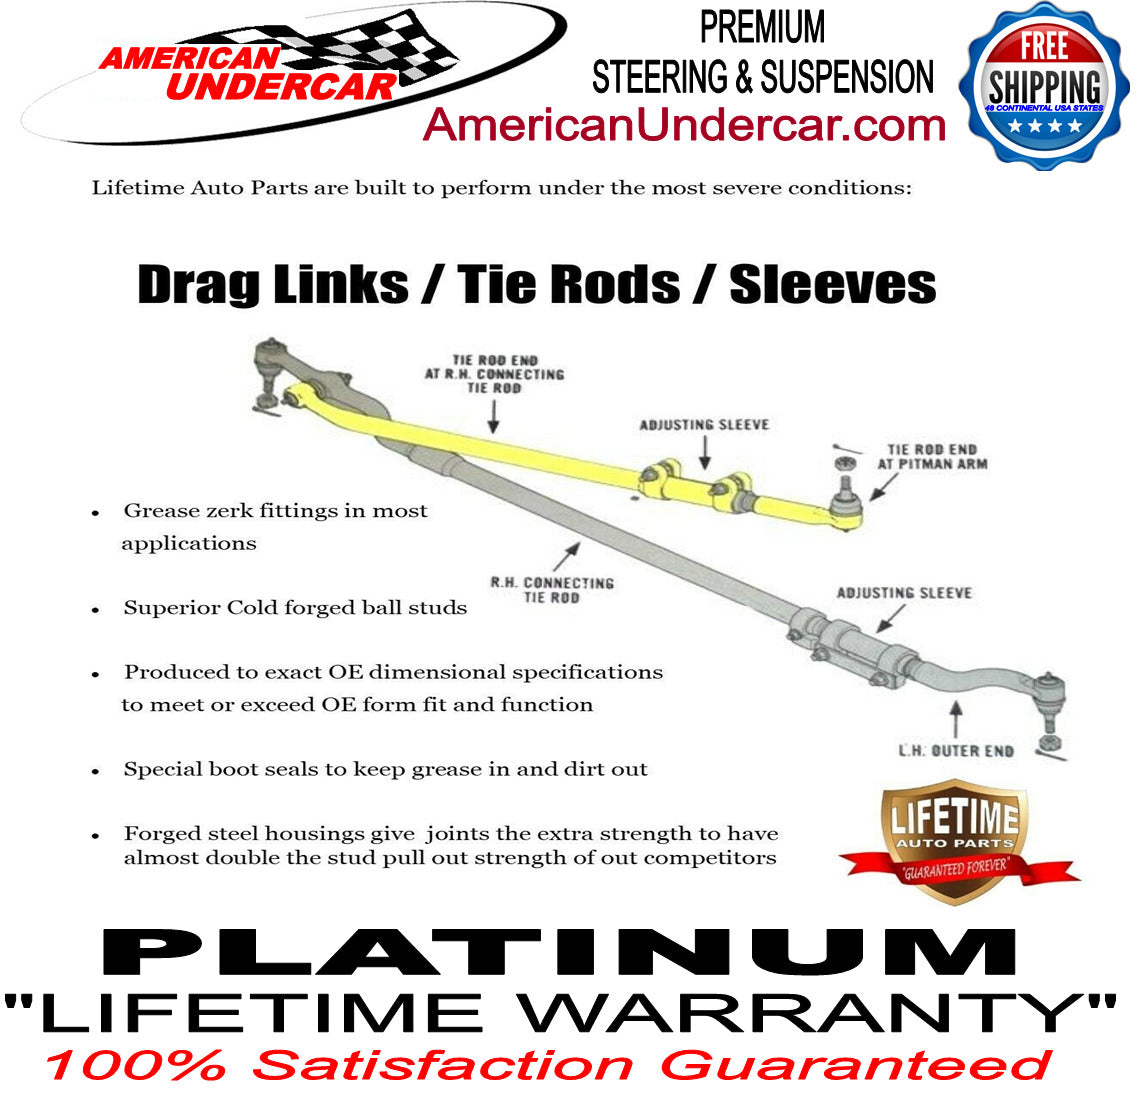 Lifetime Drag Link Tie Rod Sleeve Steering Kit for 1999-2004 Ford F250, F350 Super Duty 2WD, Mono Beam Axle